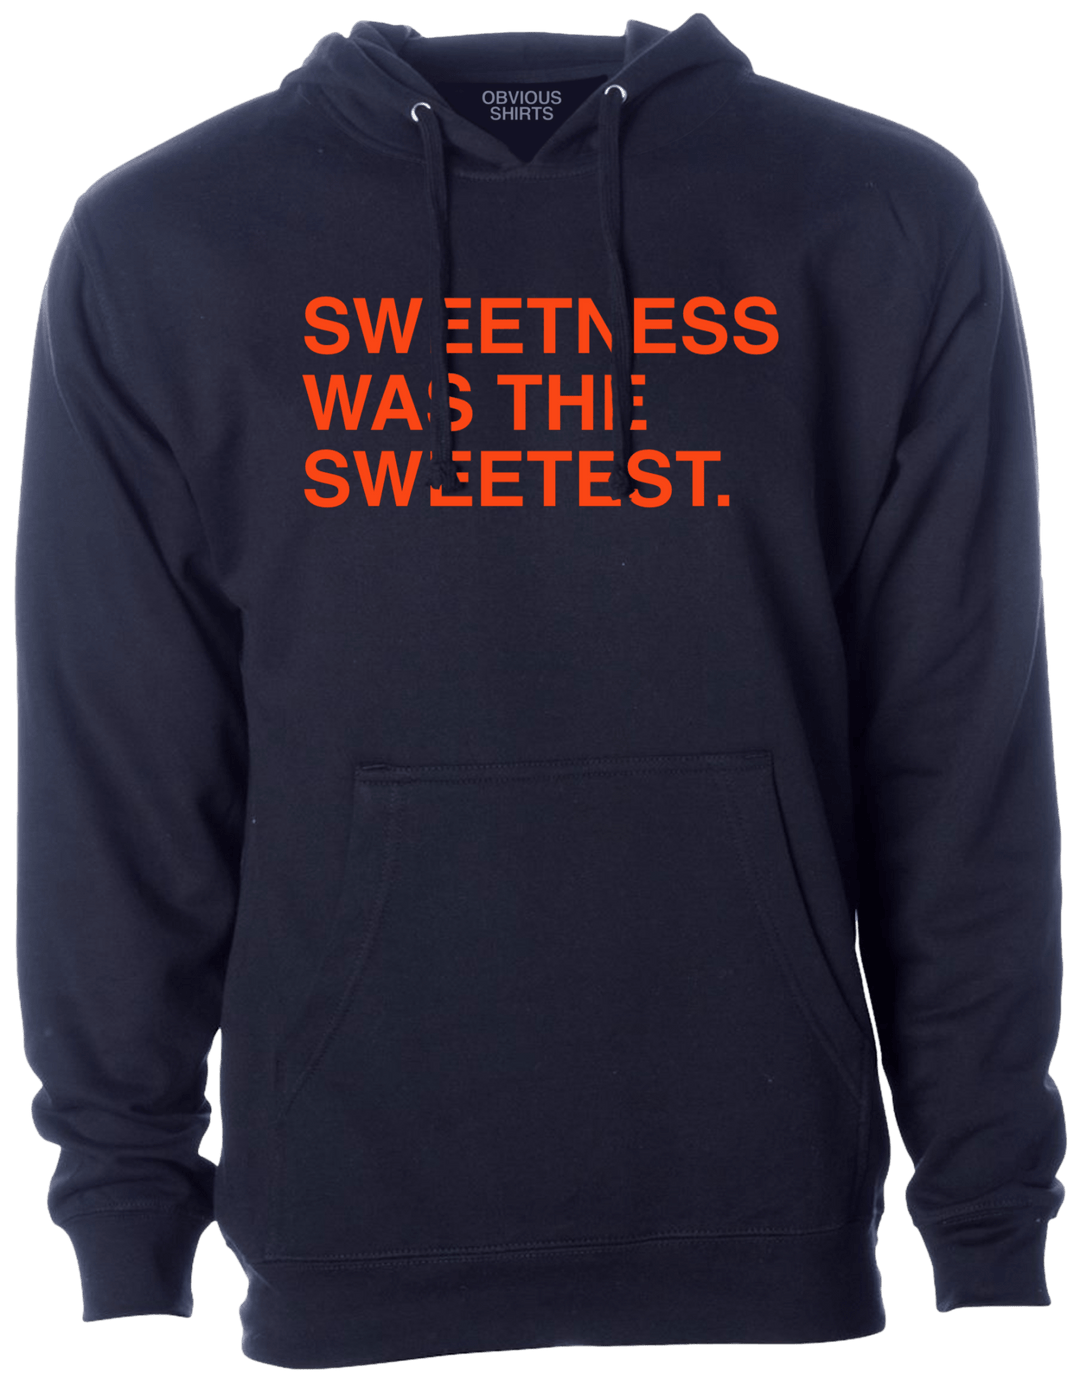 SWEETNESS WAS THE SWEETEST. (HOODED SWEATSHIRT) - OBVIOUS SHIRTS